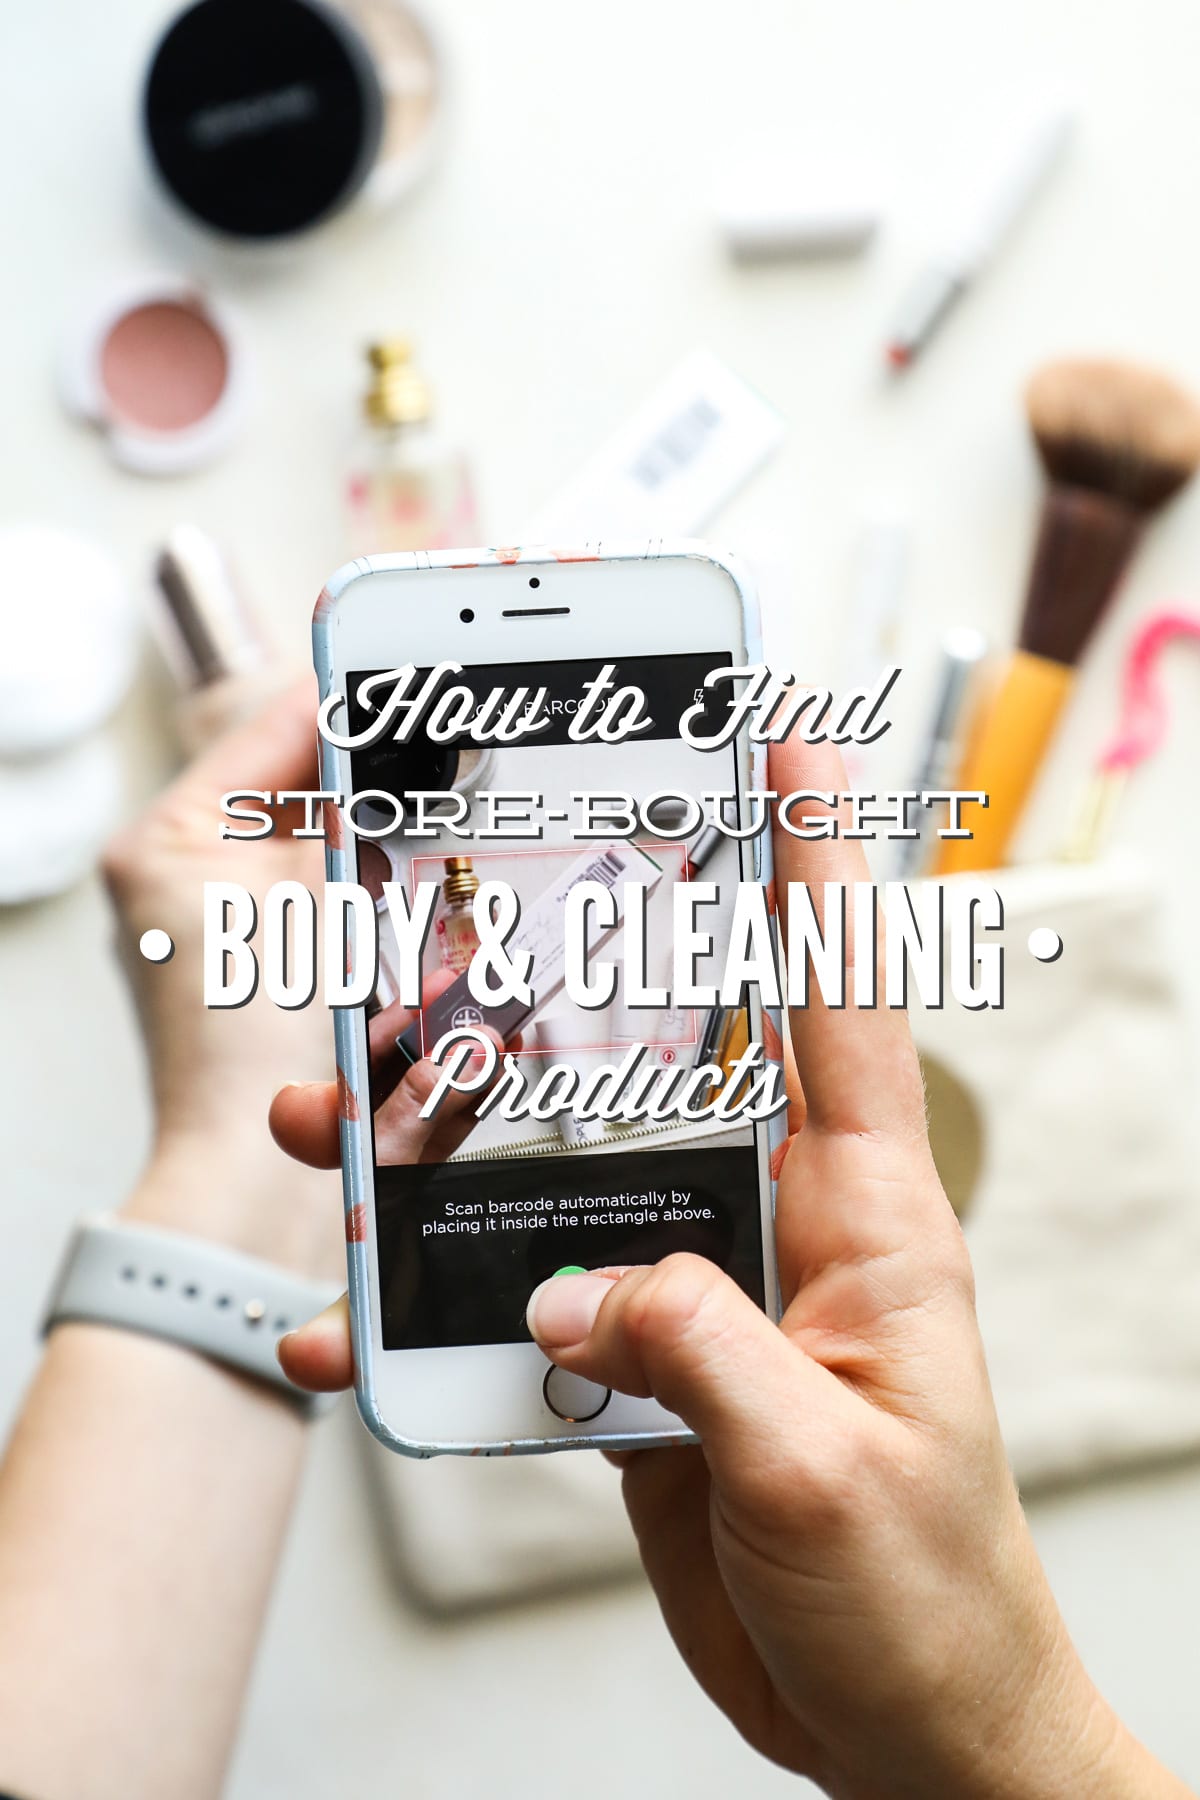 How to Easily Find Natural Store-Bought Body and Cleaning Products